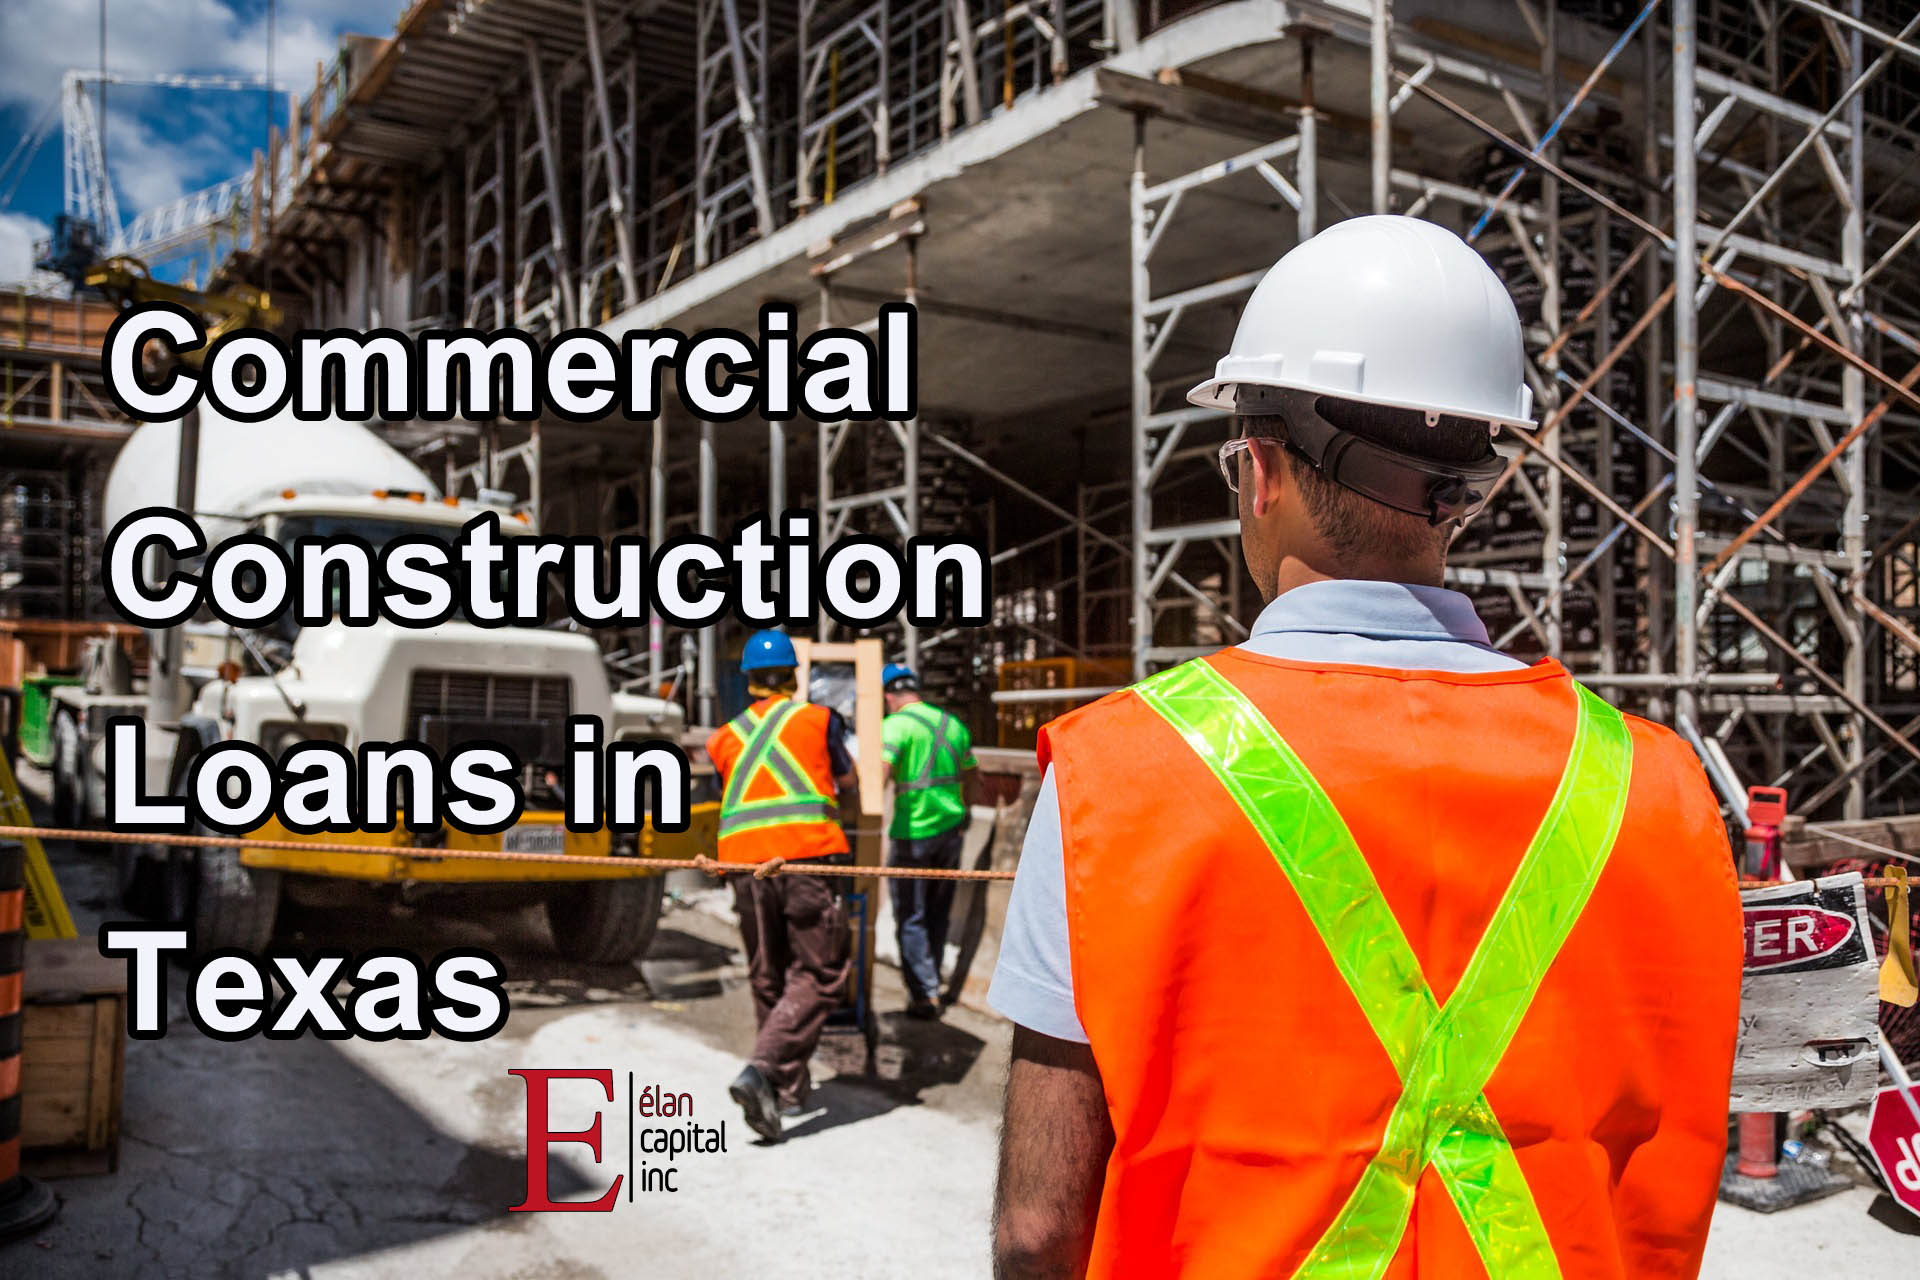 Commercial Construction Loans in Texas